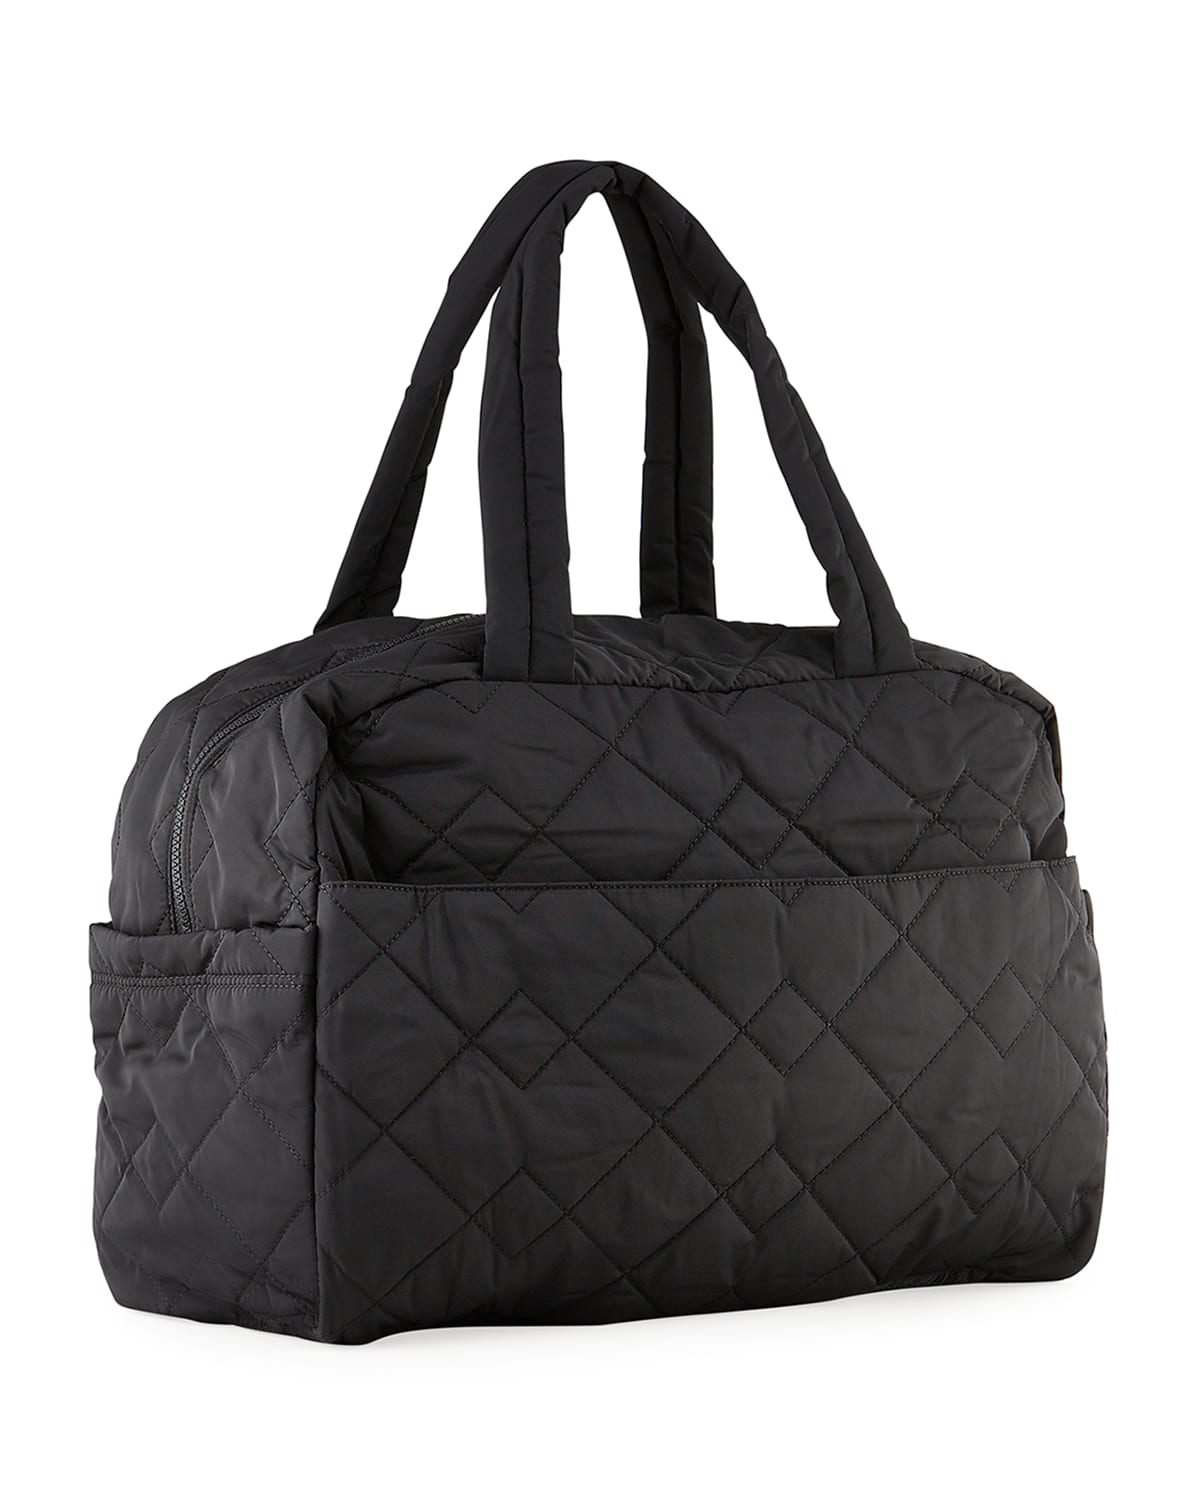 The Marc Jacobs Large Quilted Weekend Tote Bag